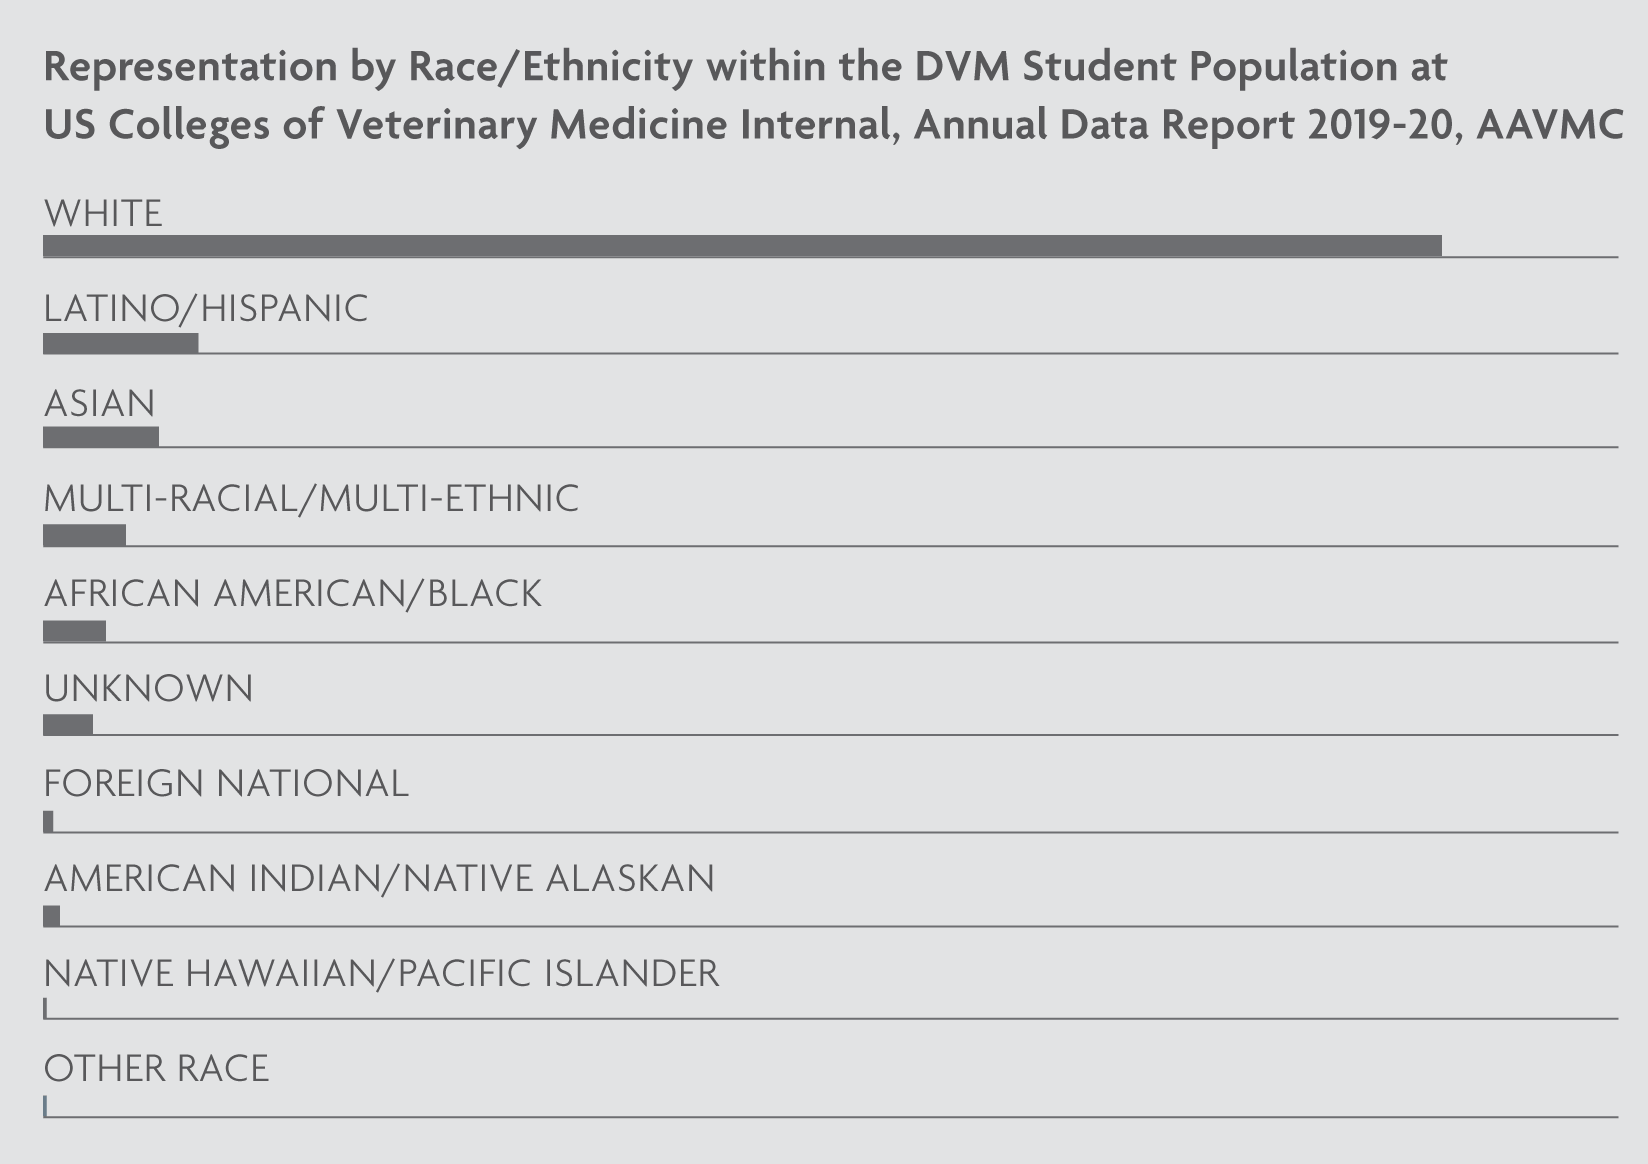 Representation by Race/Ethnicity within the DVM Student Population at US Colleges of Veterinary Medicine Internal, Annual Data Report 2019-20, AAVMC